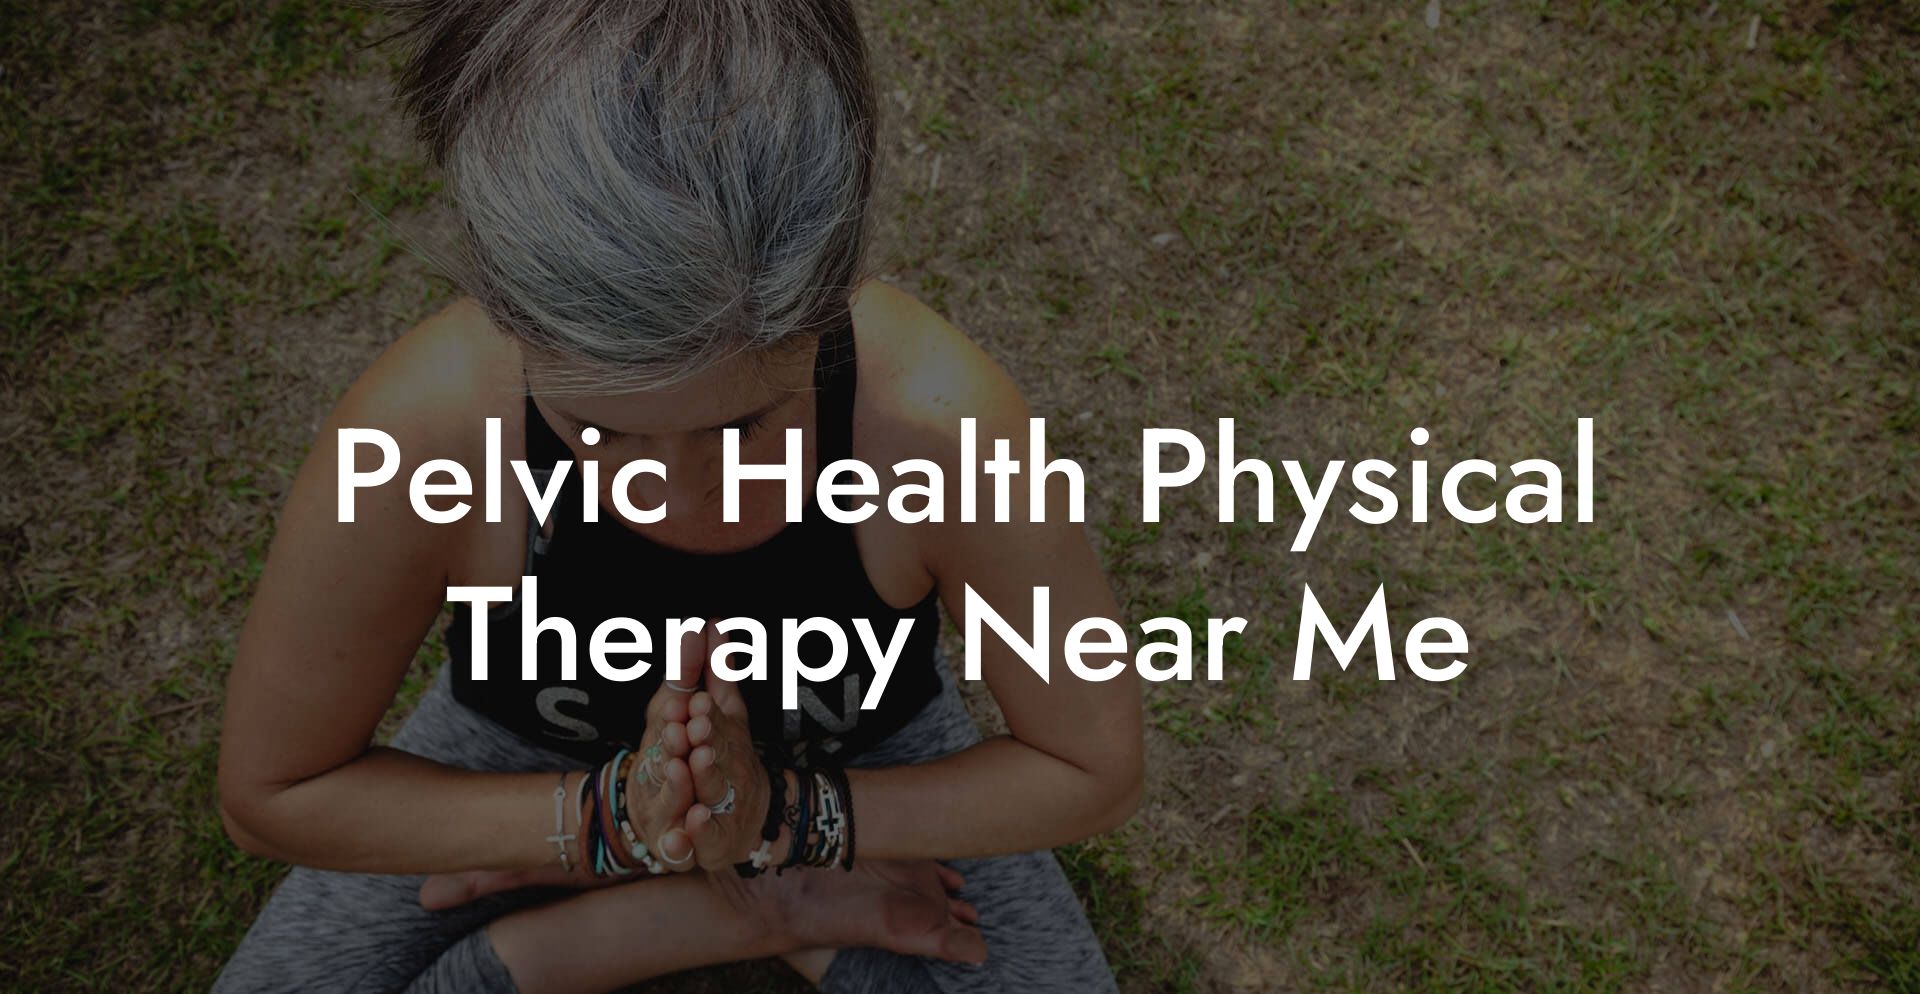 Pelvic Health Physical Therapy Near Me